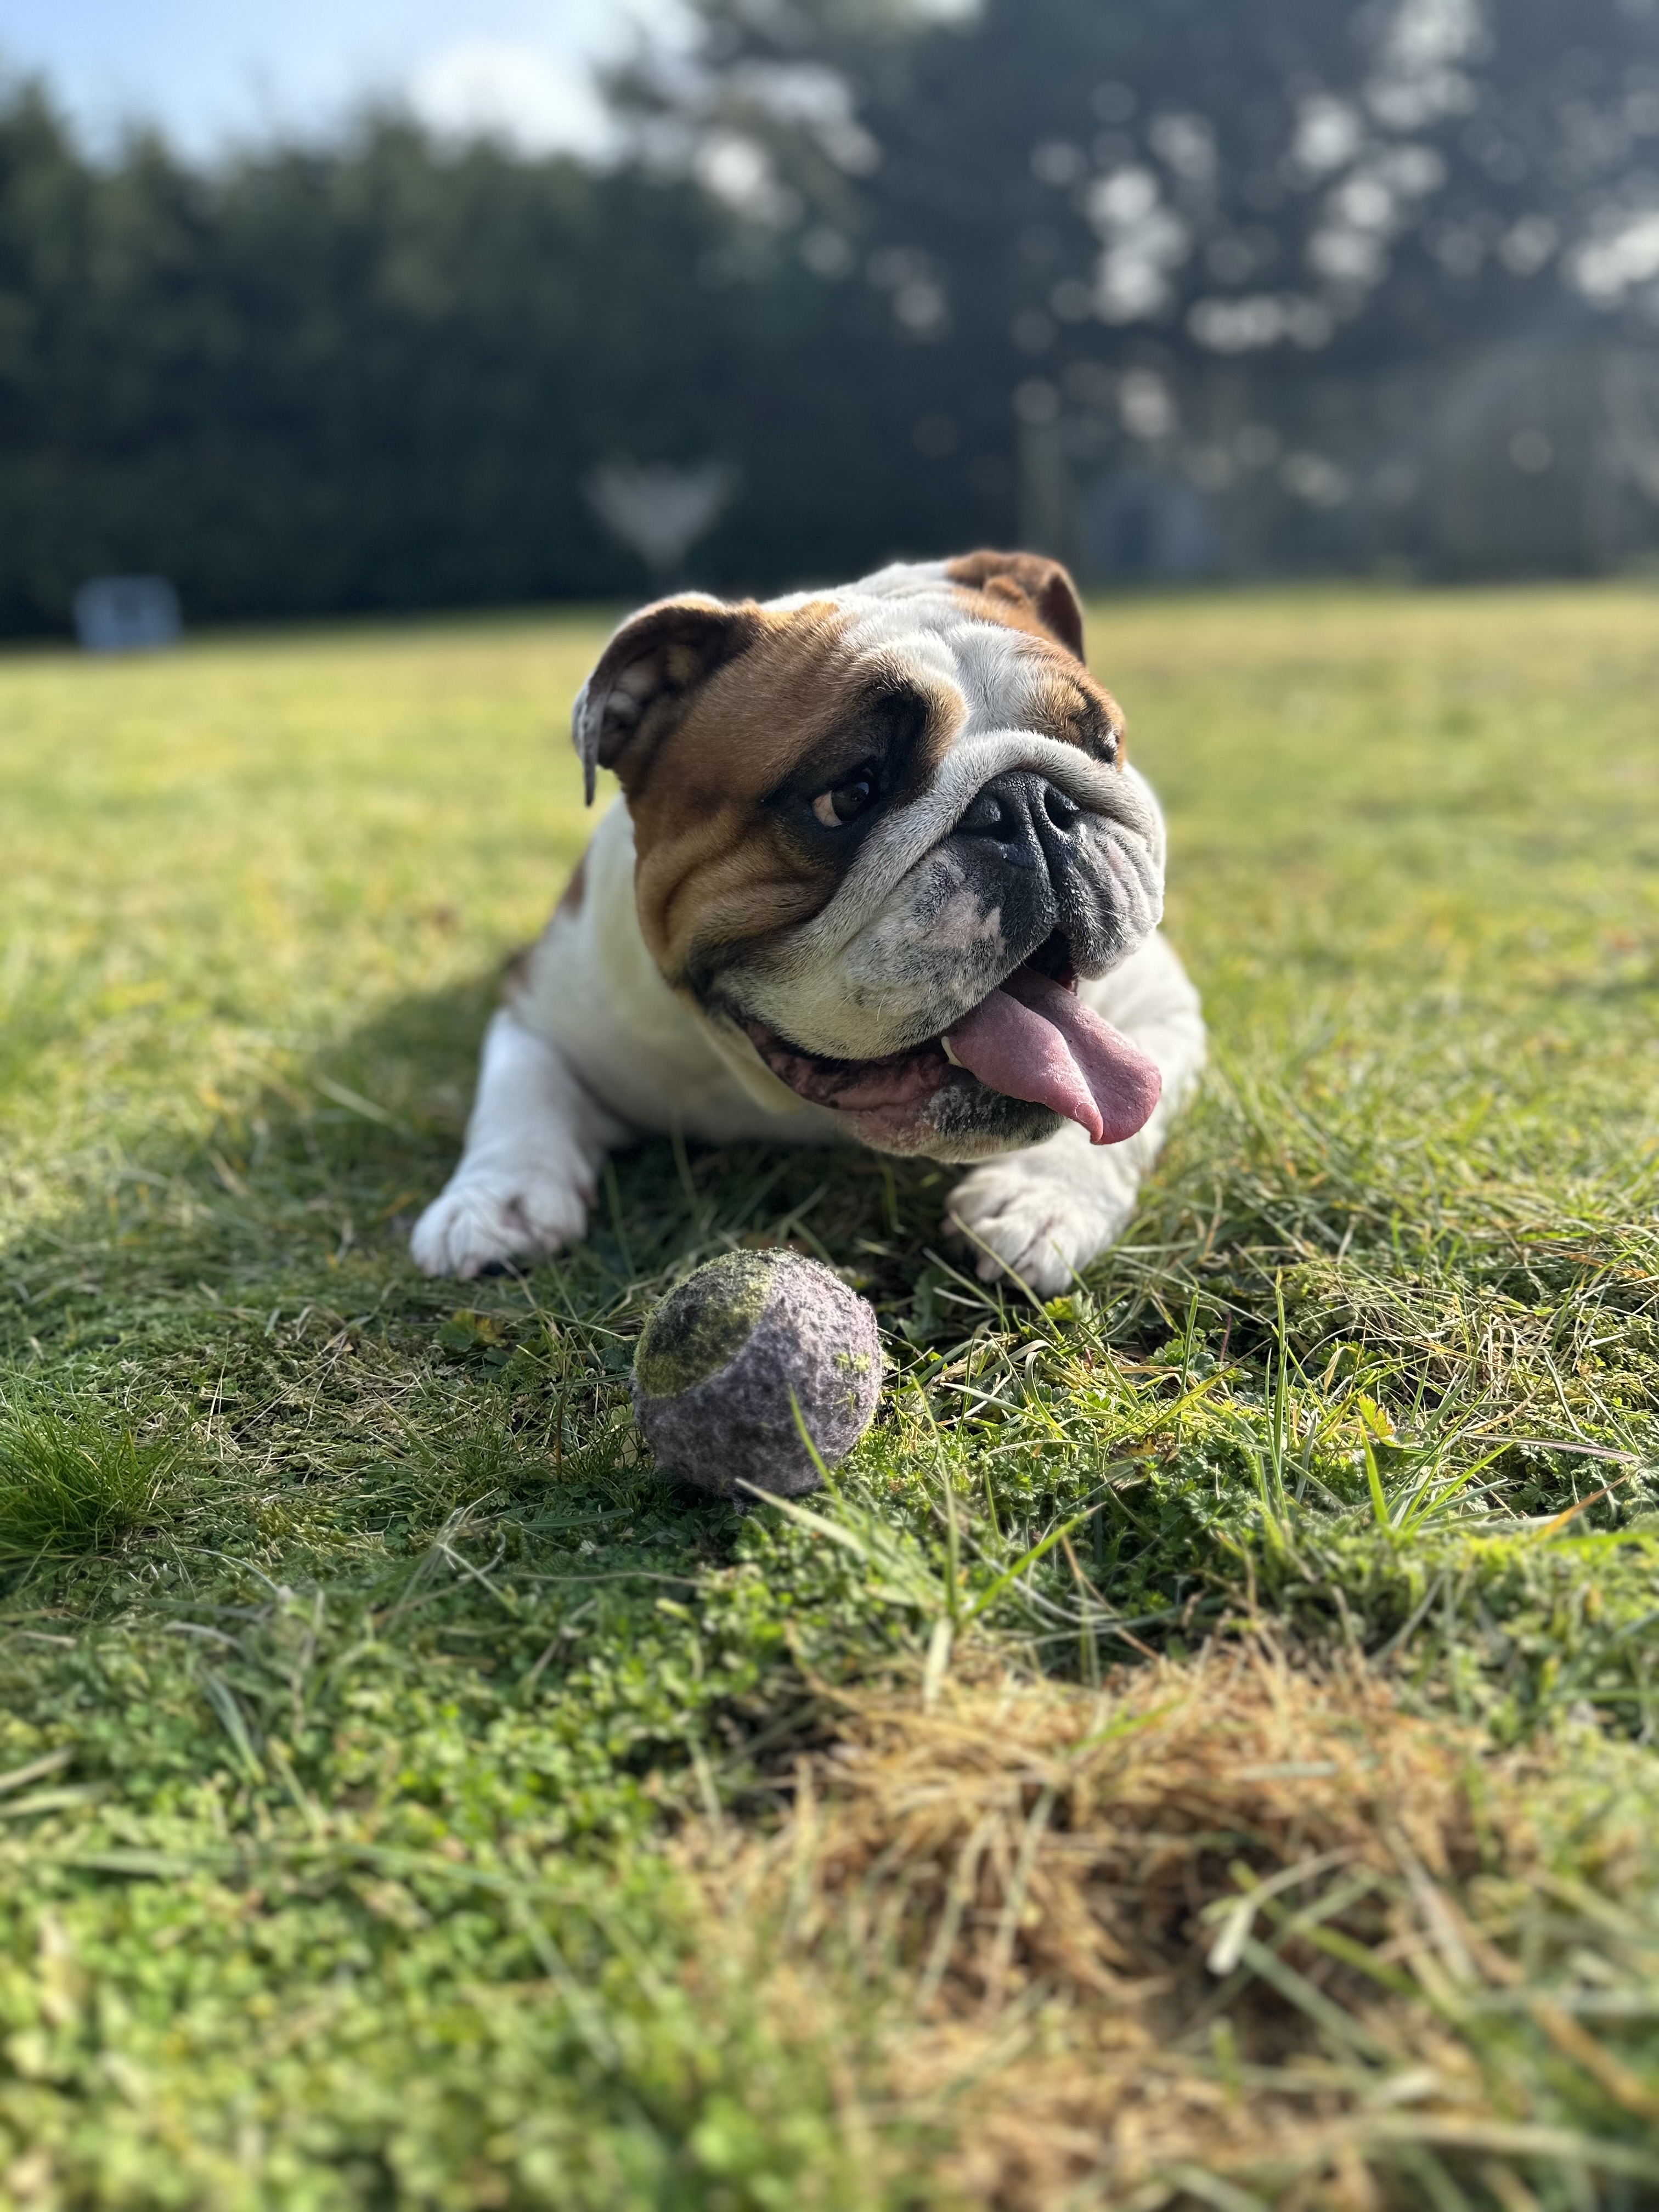 A bulldog playing with a ball in the field